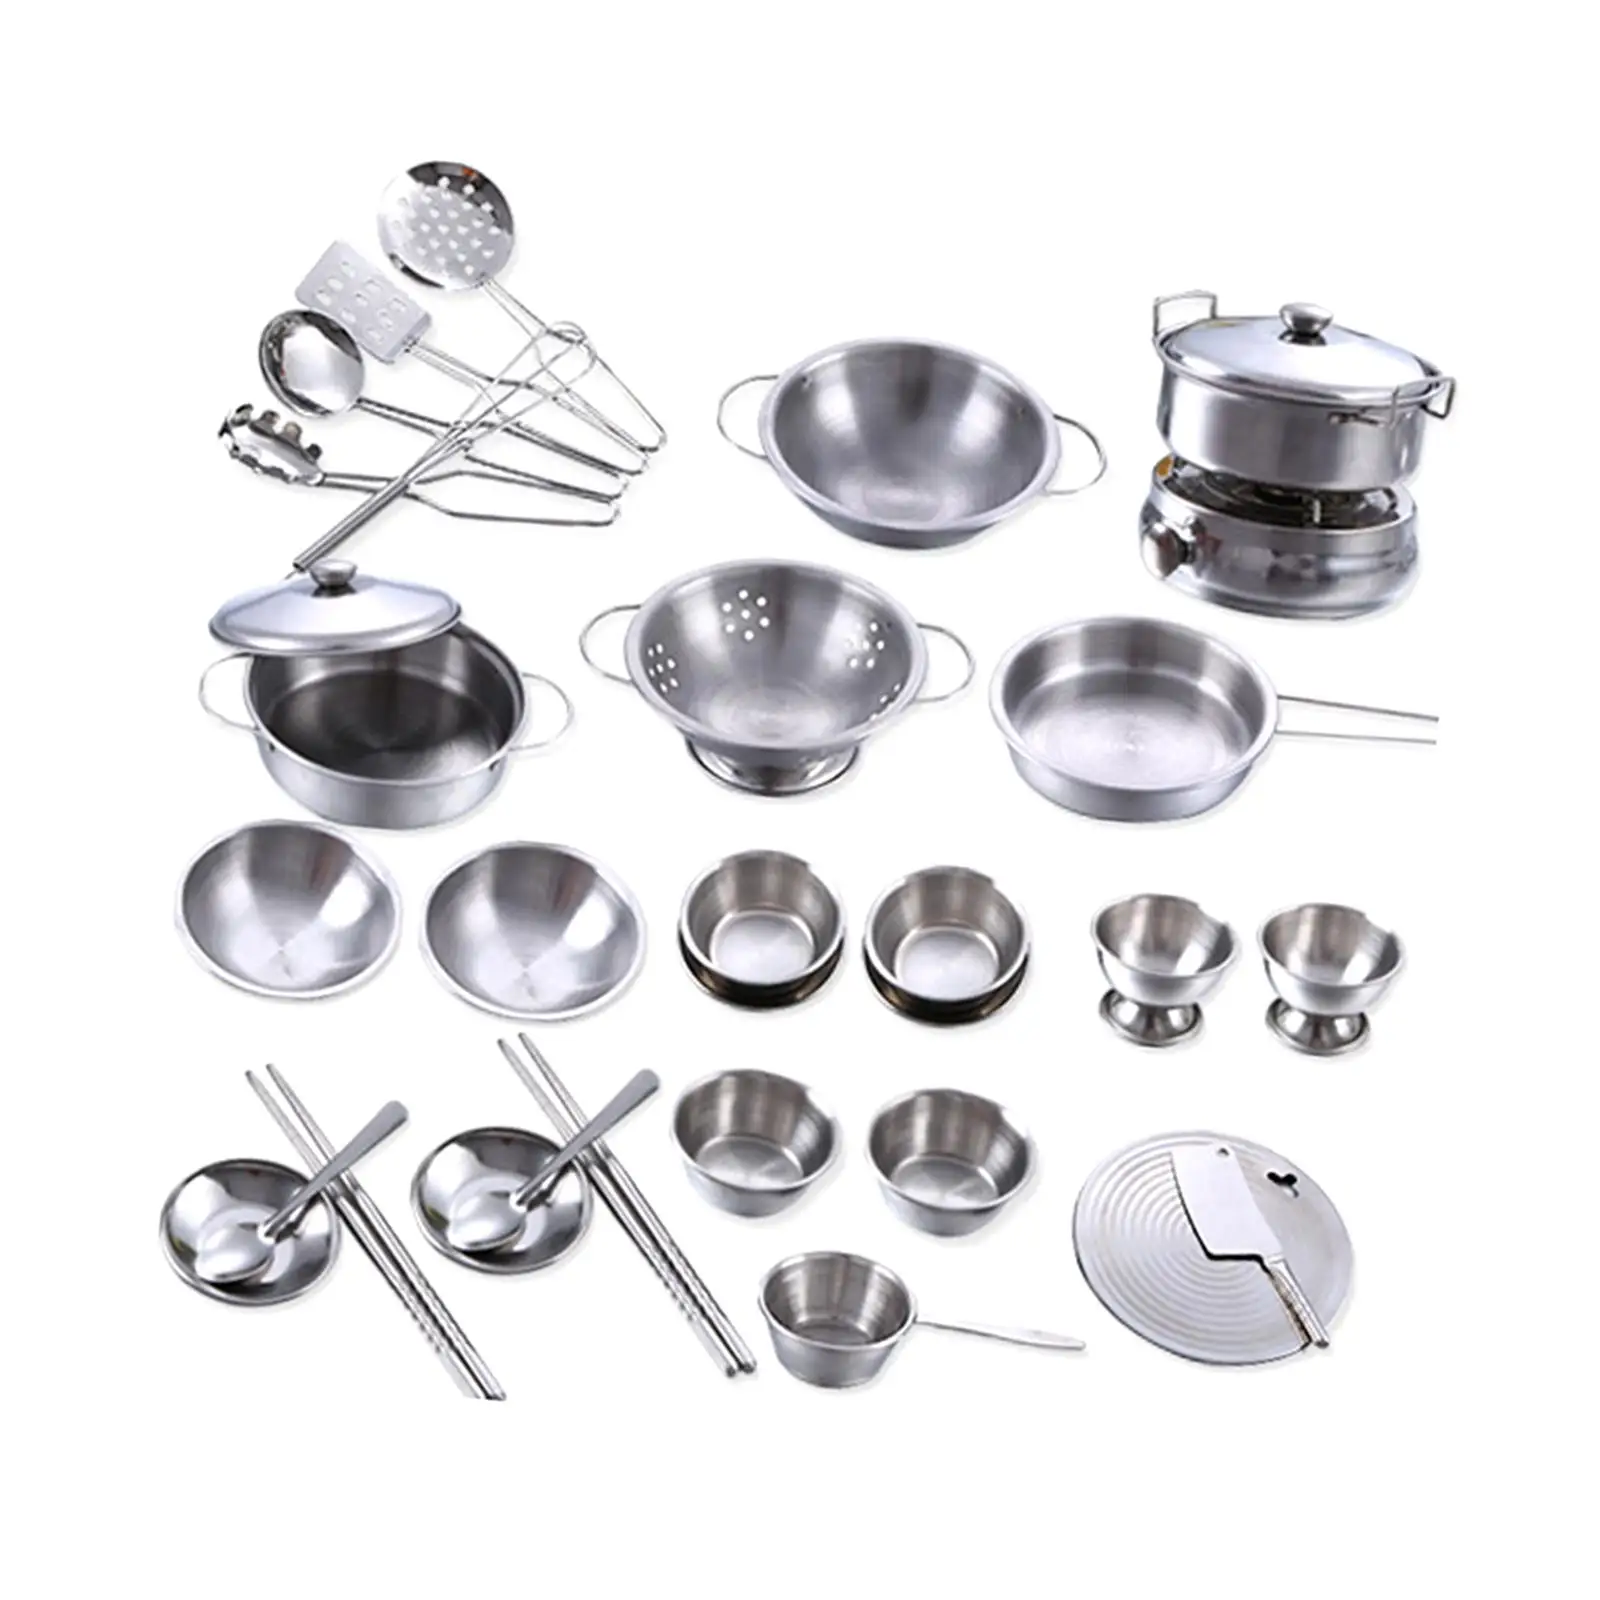 25Pcs Kitchen Pretend Toys Cooking Utensils Stainless Steel for Aged 3 Years and up Mini Pots Pans Polished Development Toys